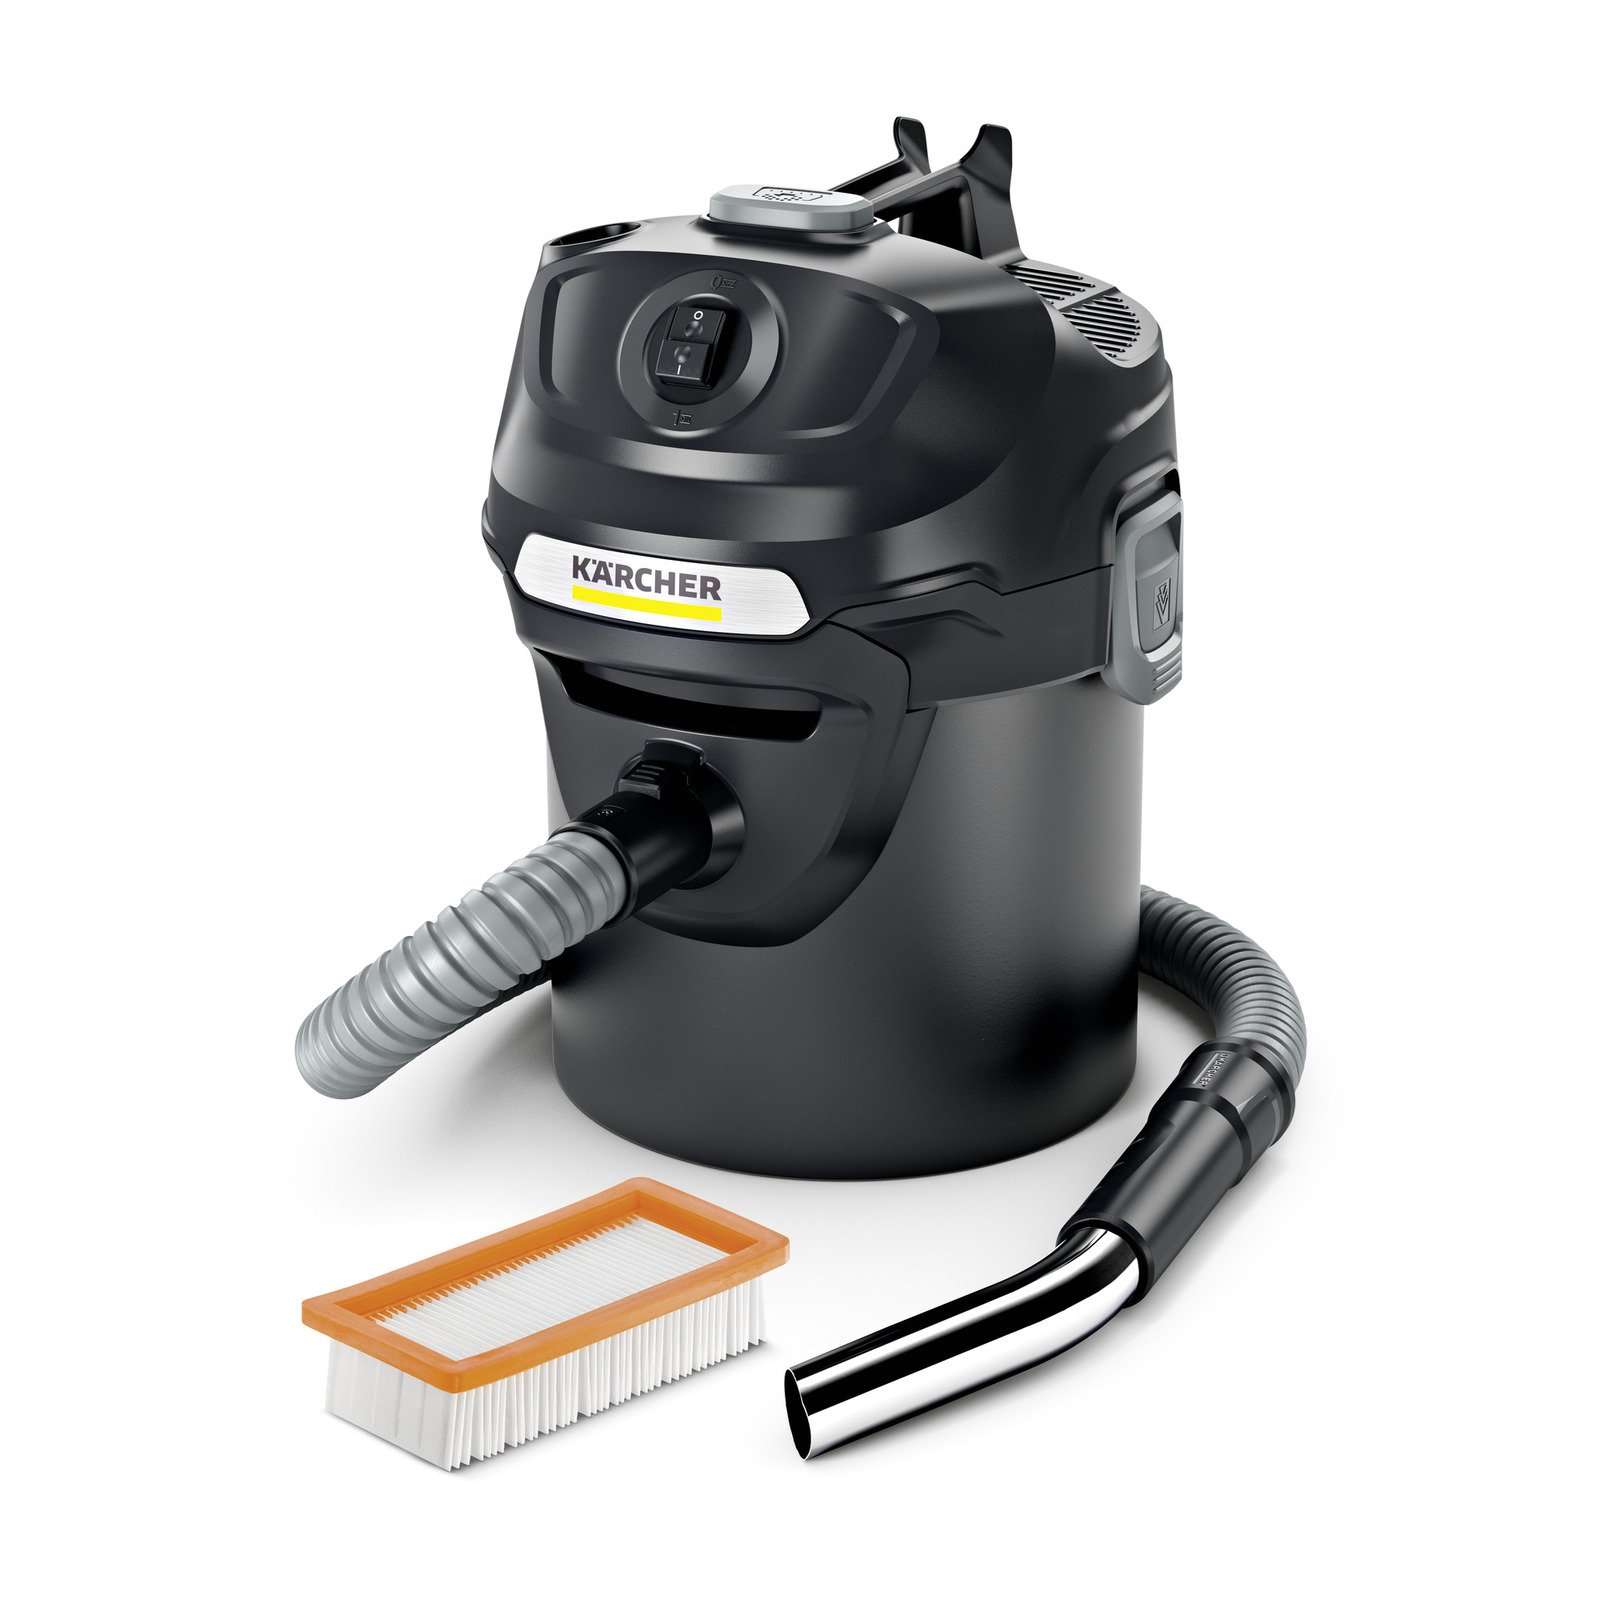 Kärcher - AD 2 Ash and dry Vacuum Cleaner